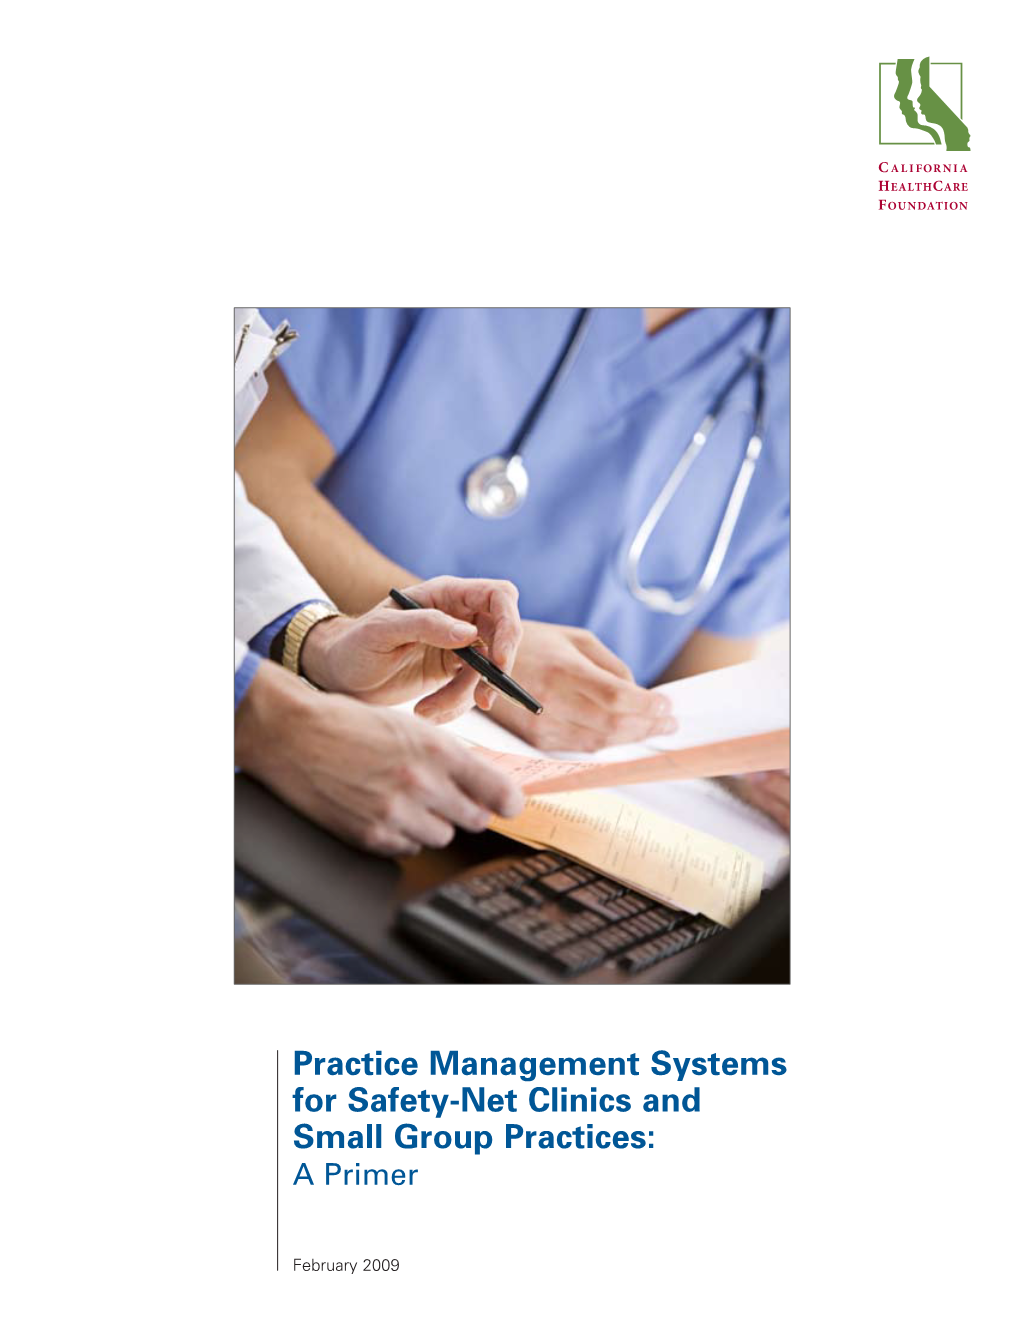 Practice Management Systems for Safety-Net Clinics and Small Group Practices: a Primer